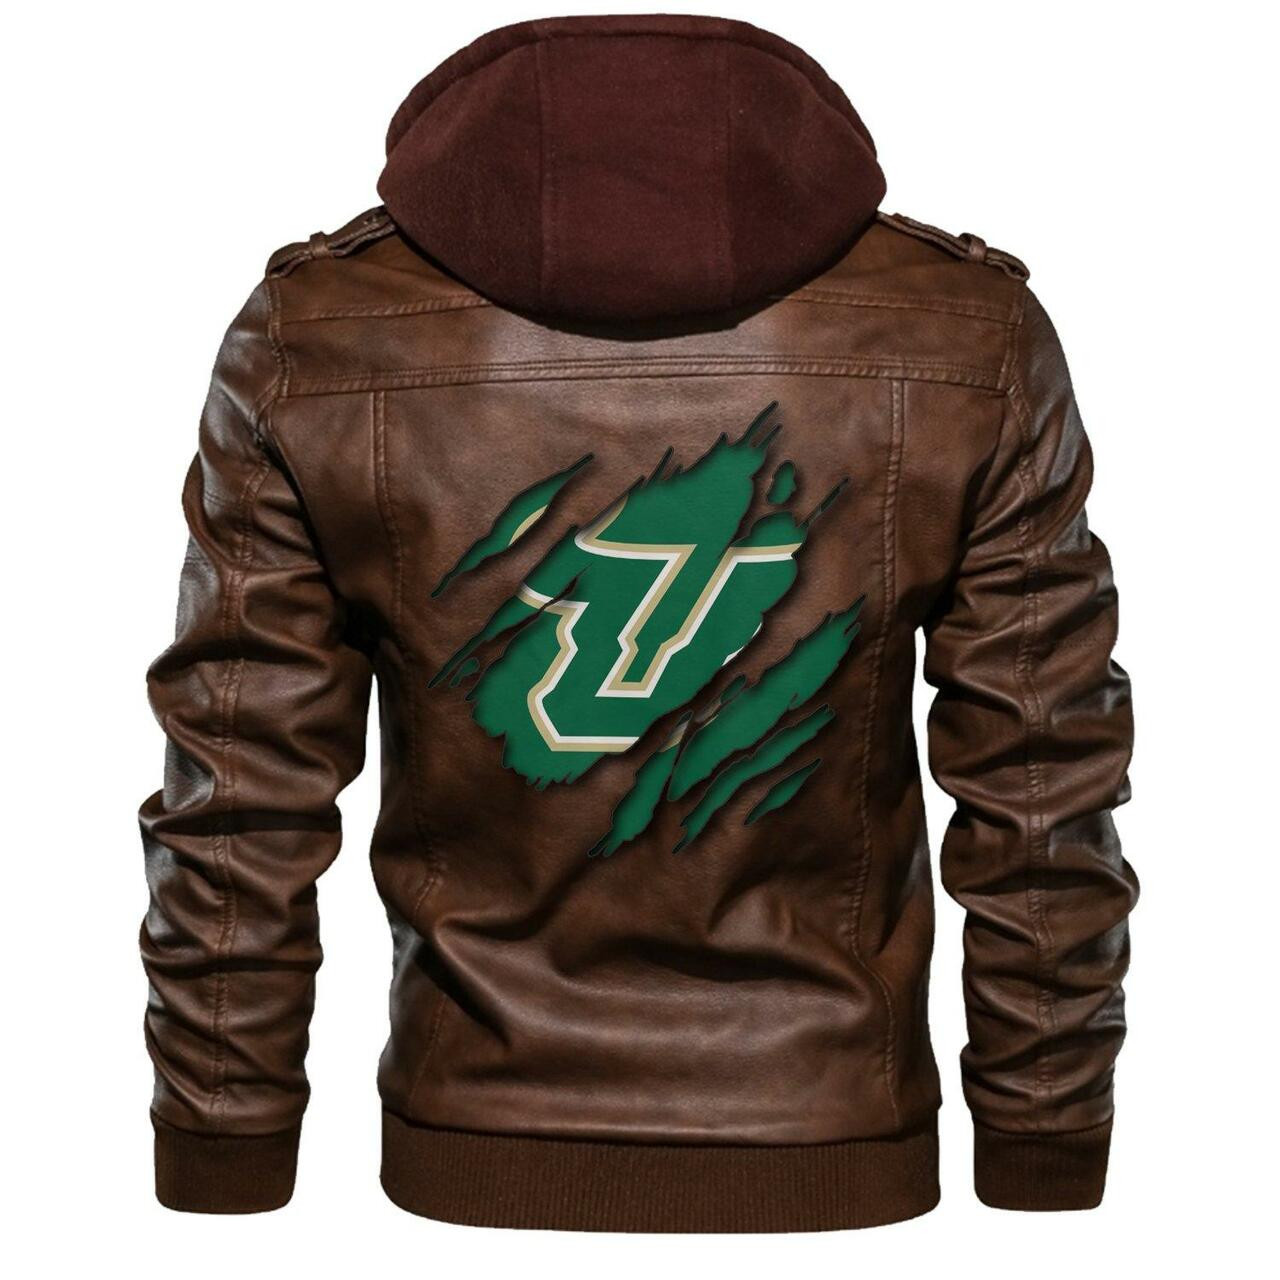 Nice leather jacket For you 141